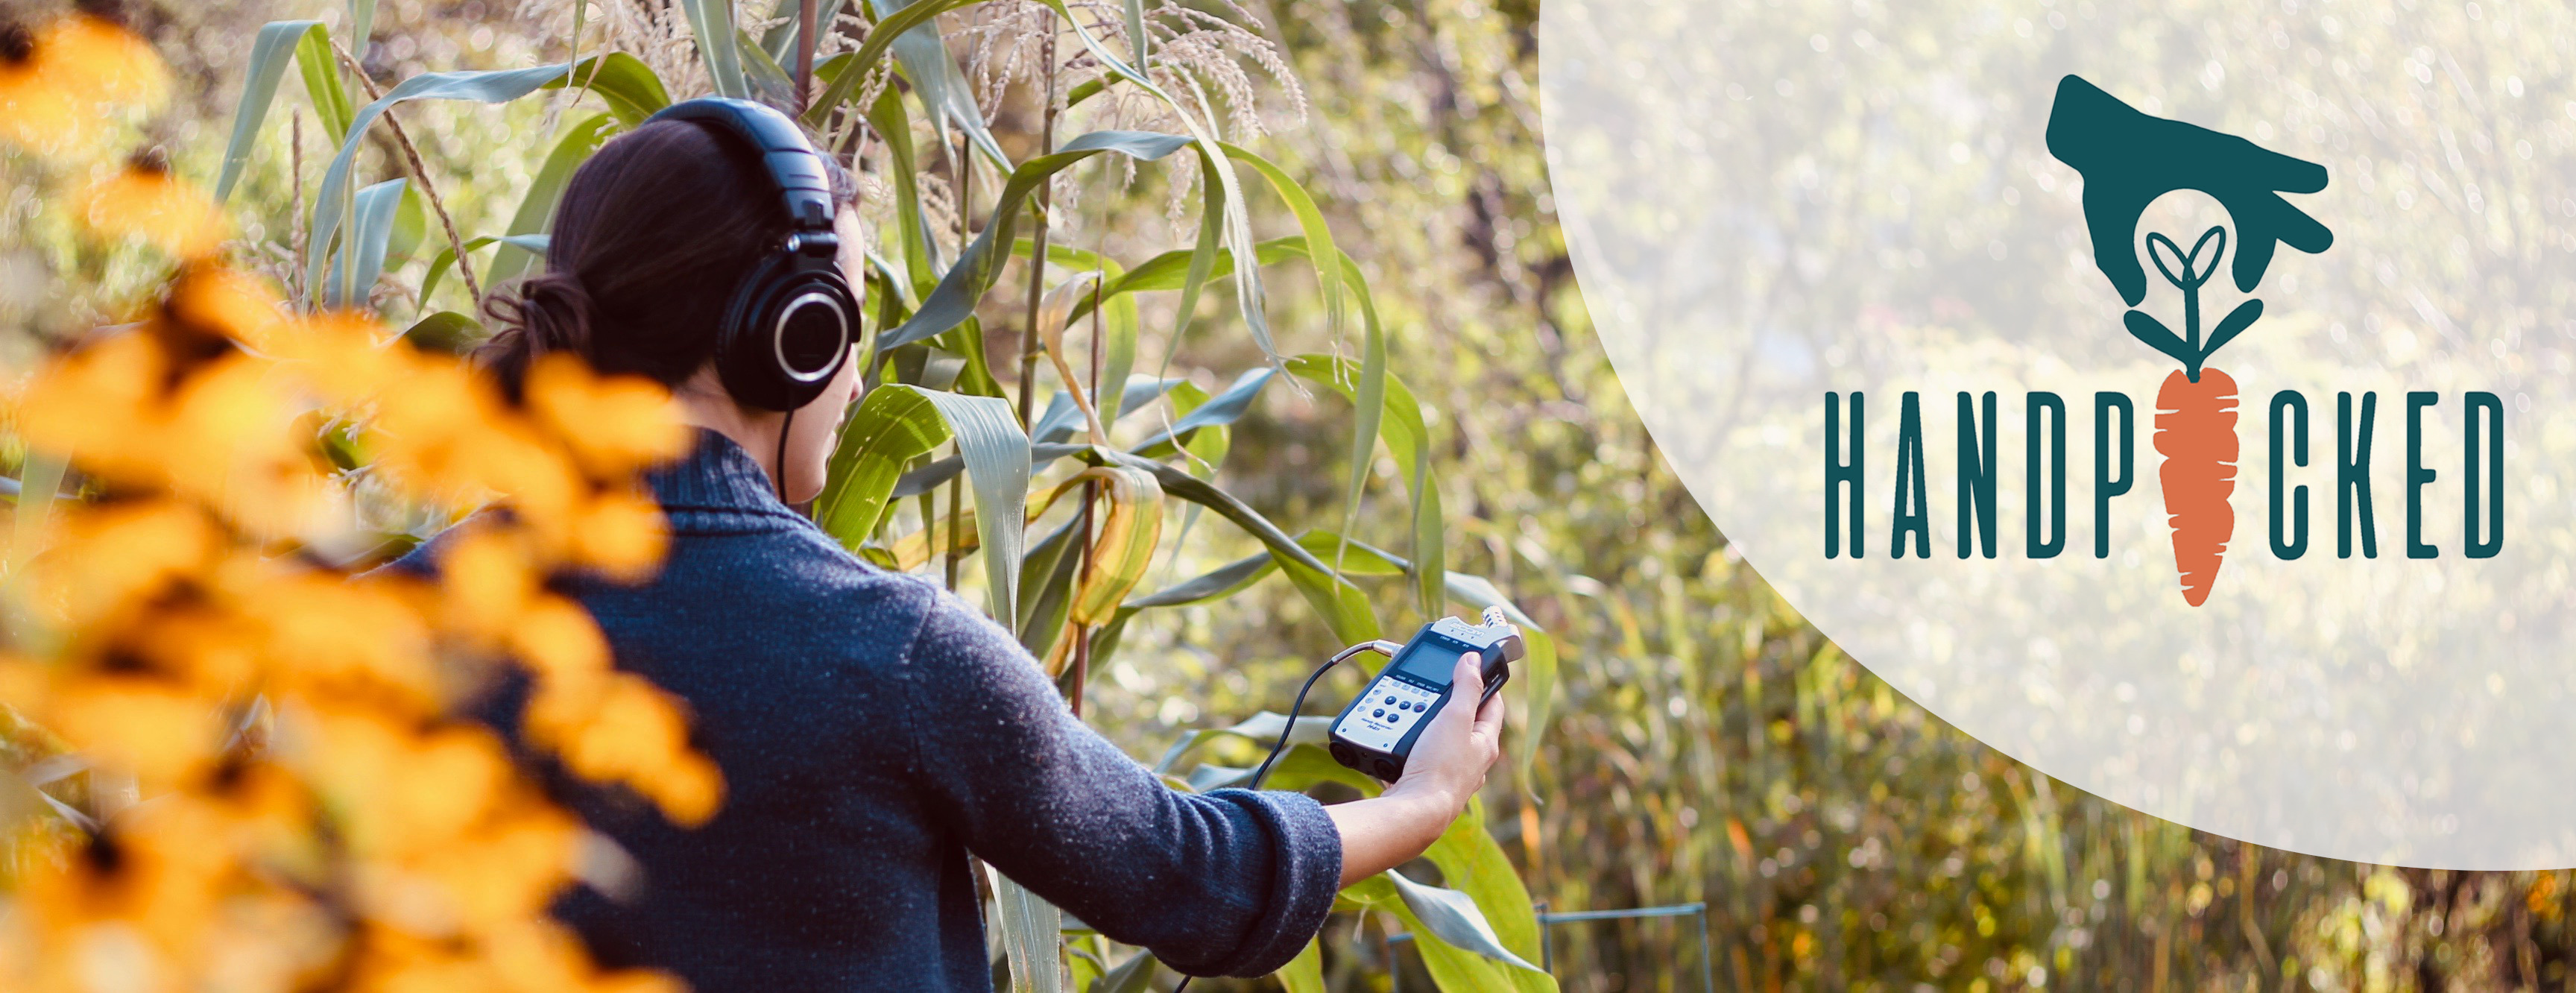 Photo of a woman in a field collecting an audio recording with the Handpicked logo overlayed